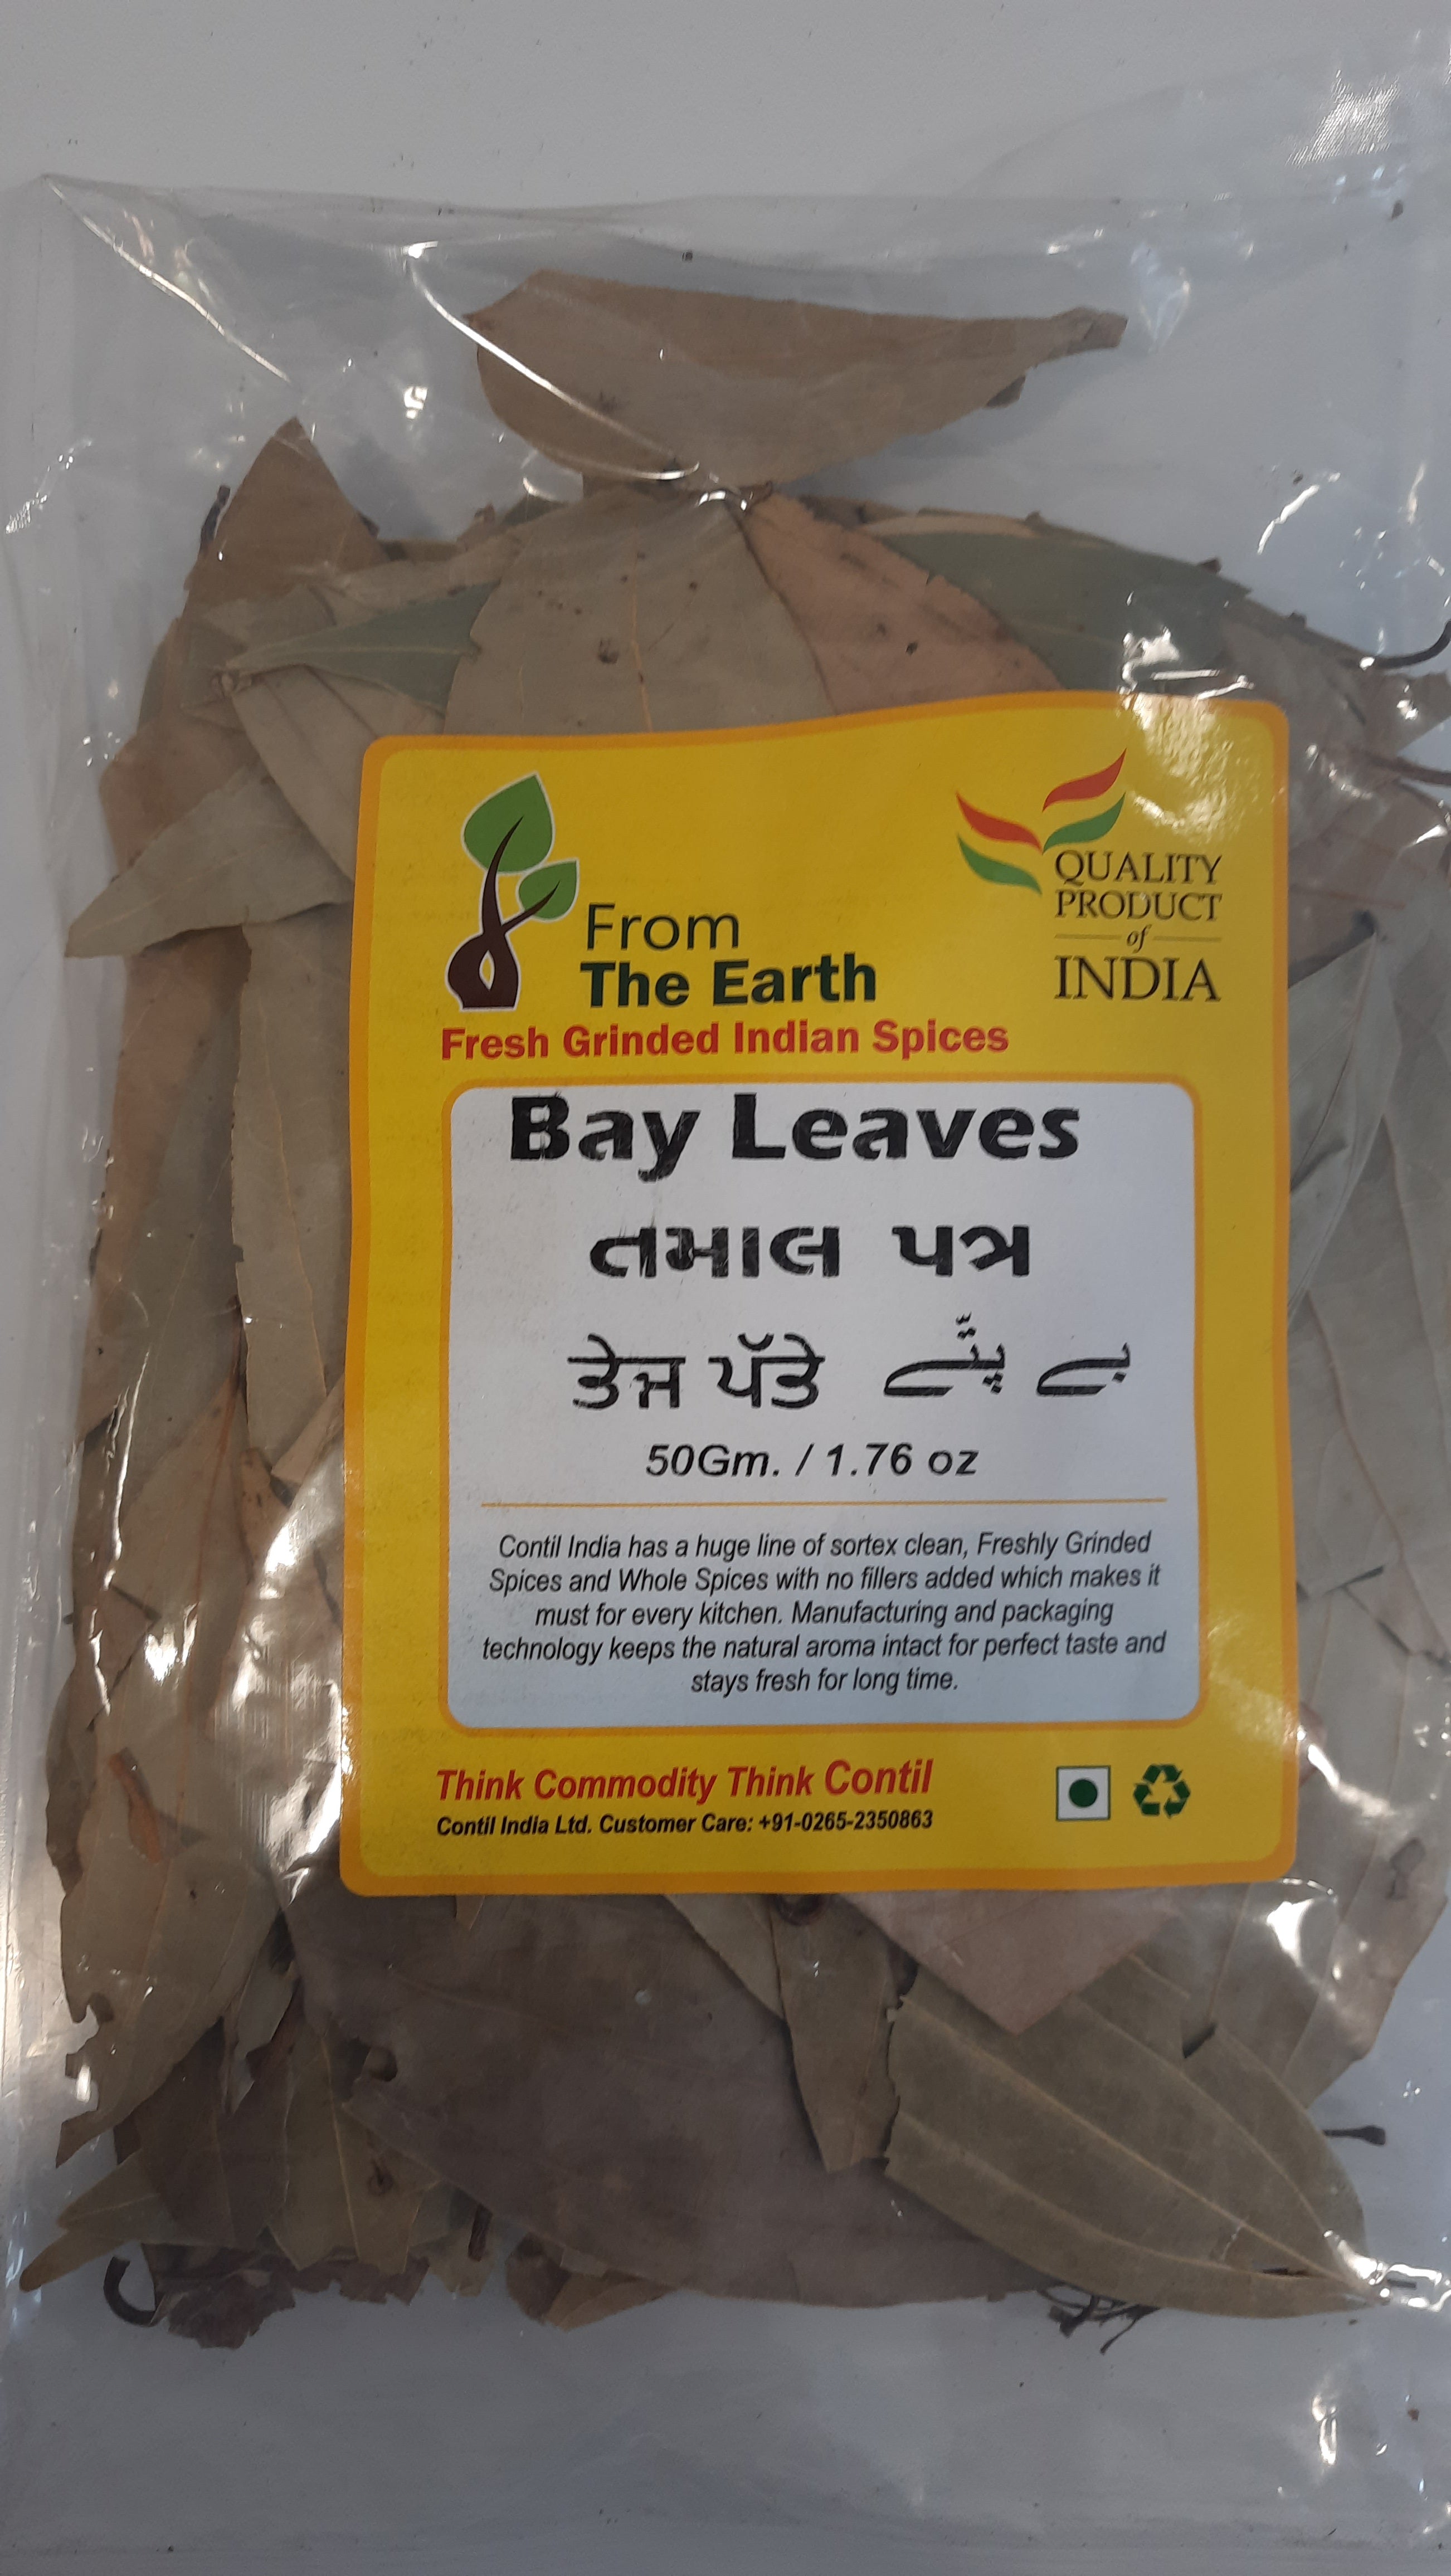 From the Earth - Bay Leaves 50g